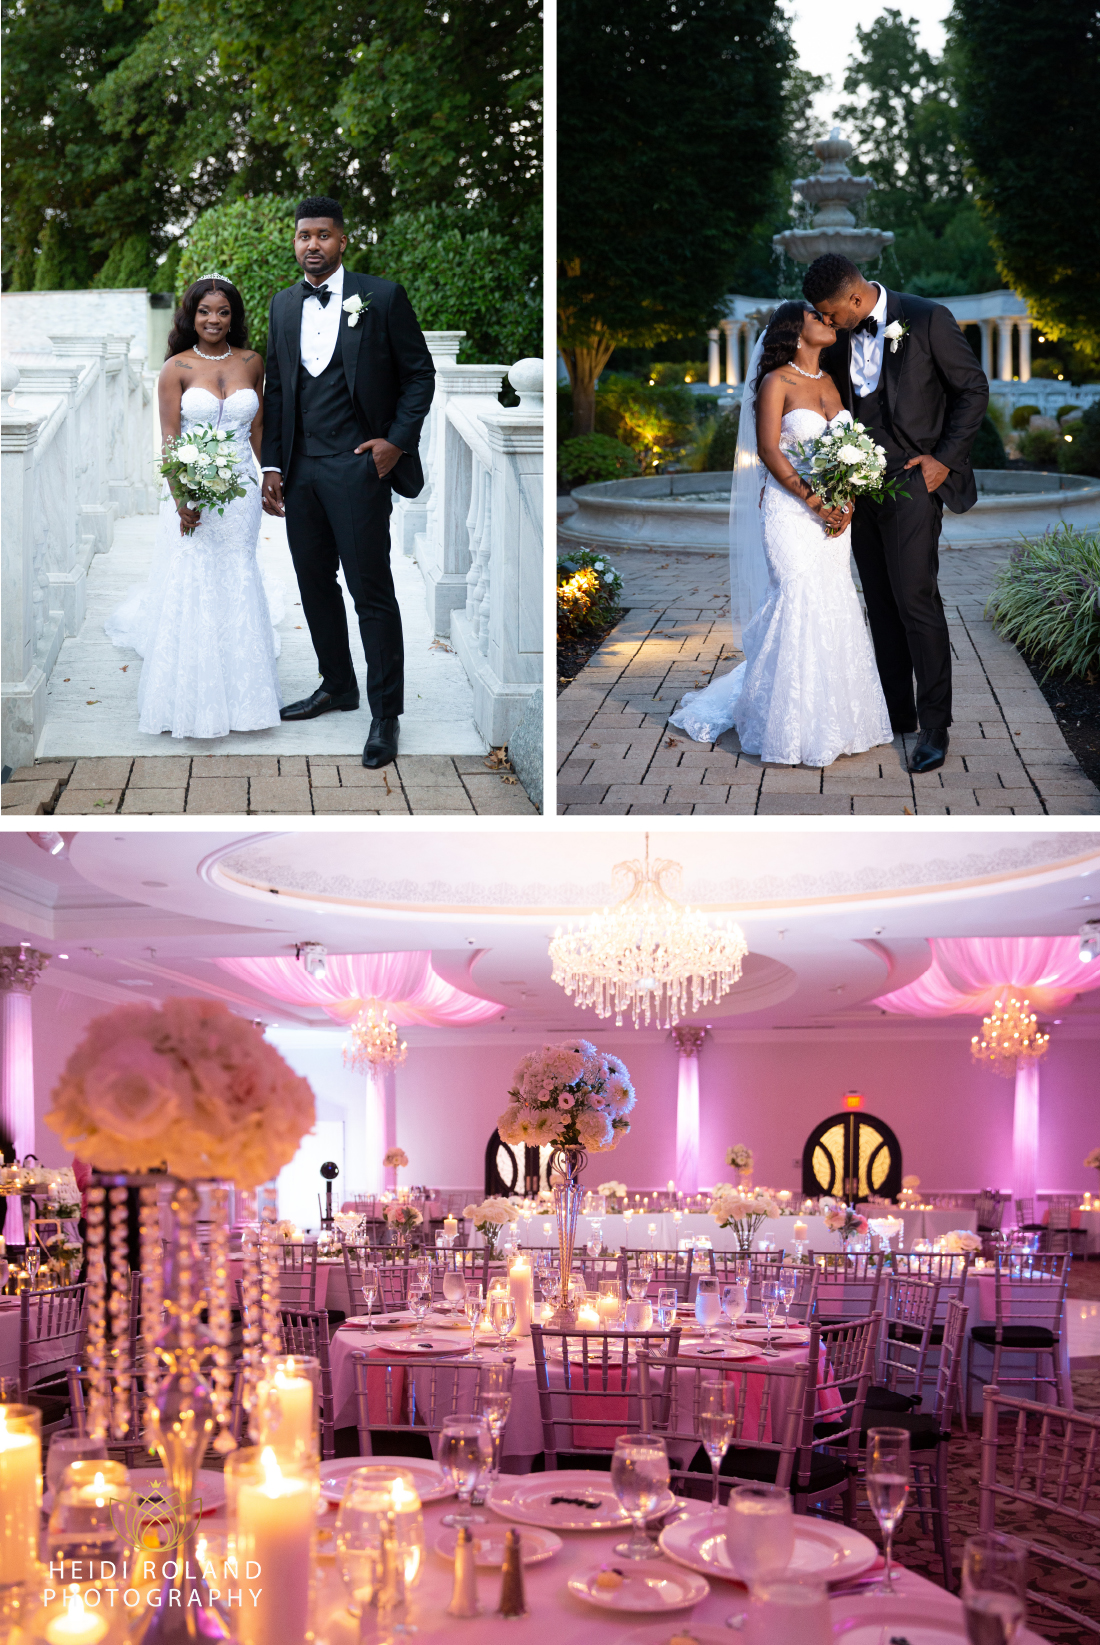 The Waterfall outside bride and groom photos and wedding reception with pink uplighting in DE